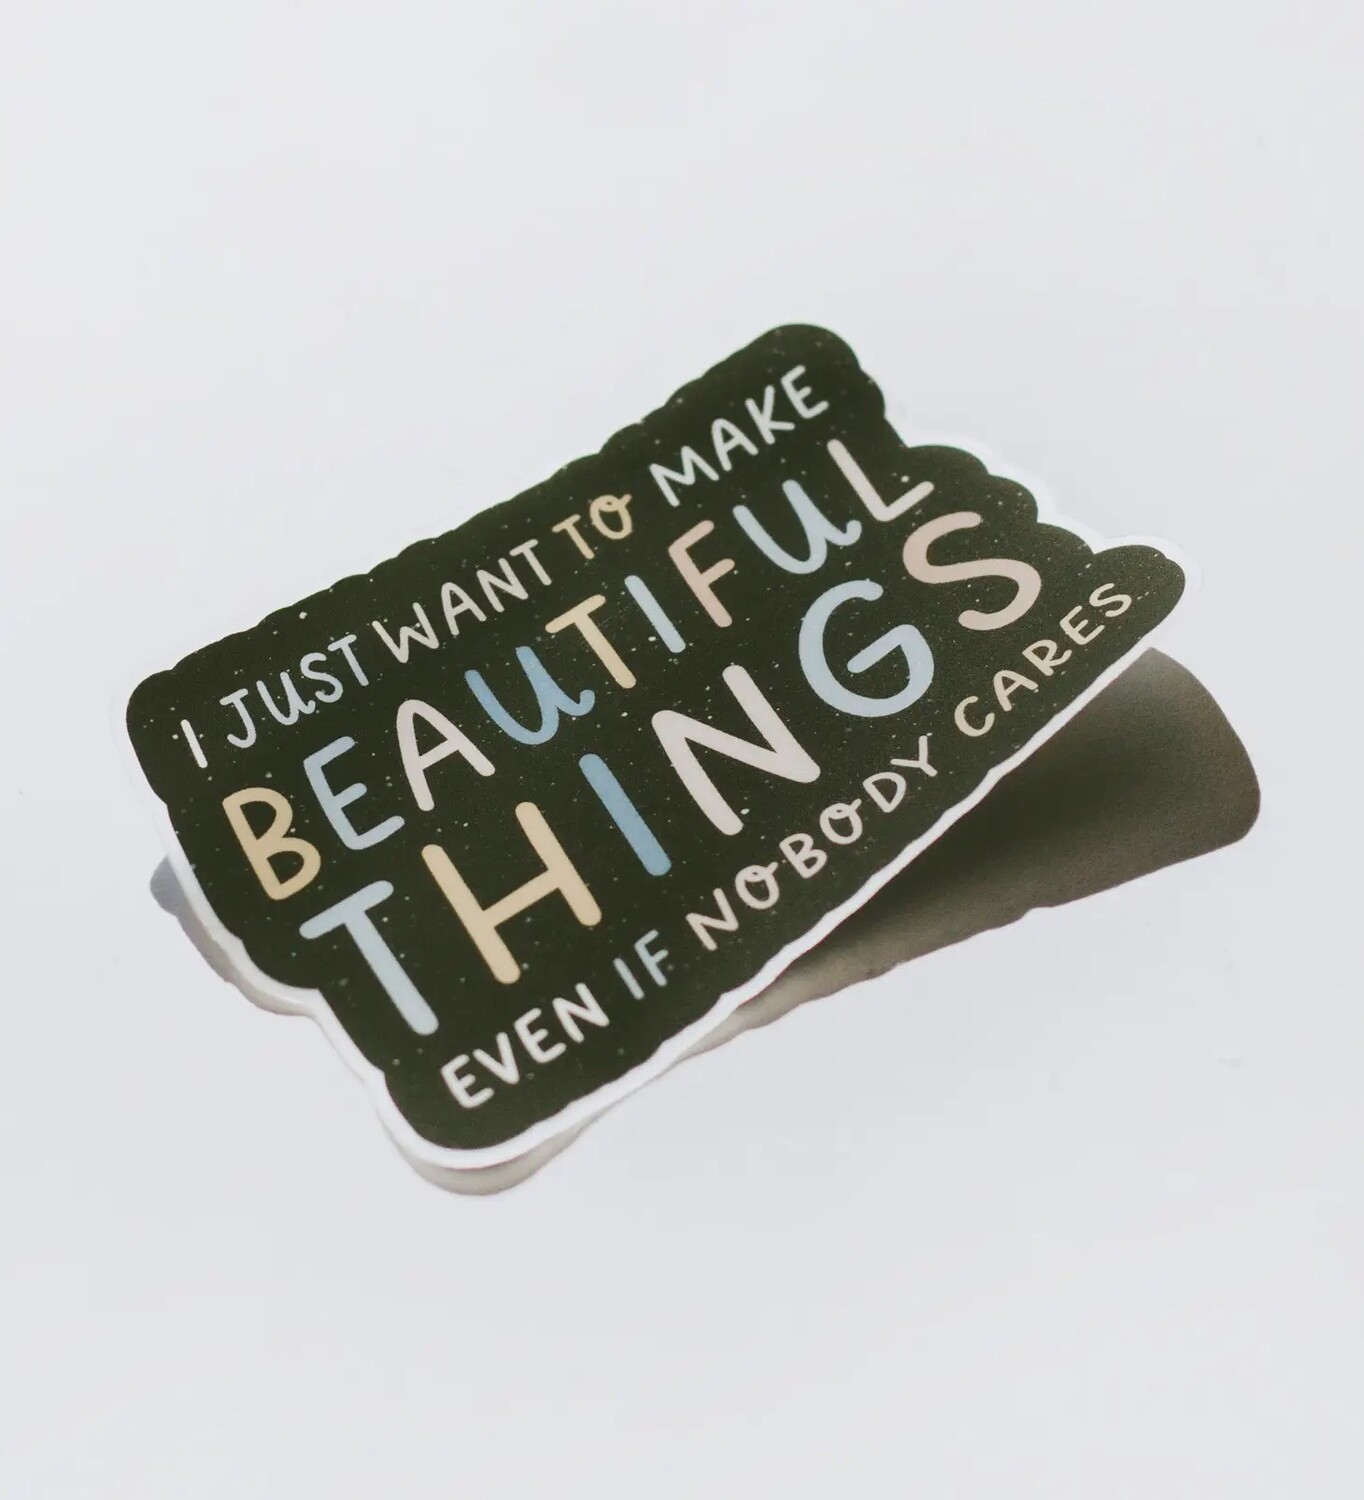 The Gray Muse "I Just Want to Make Beautiful Things Even if Nobody Cares" Sticker